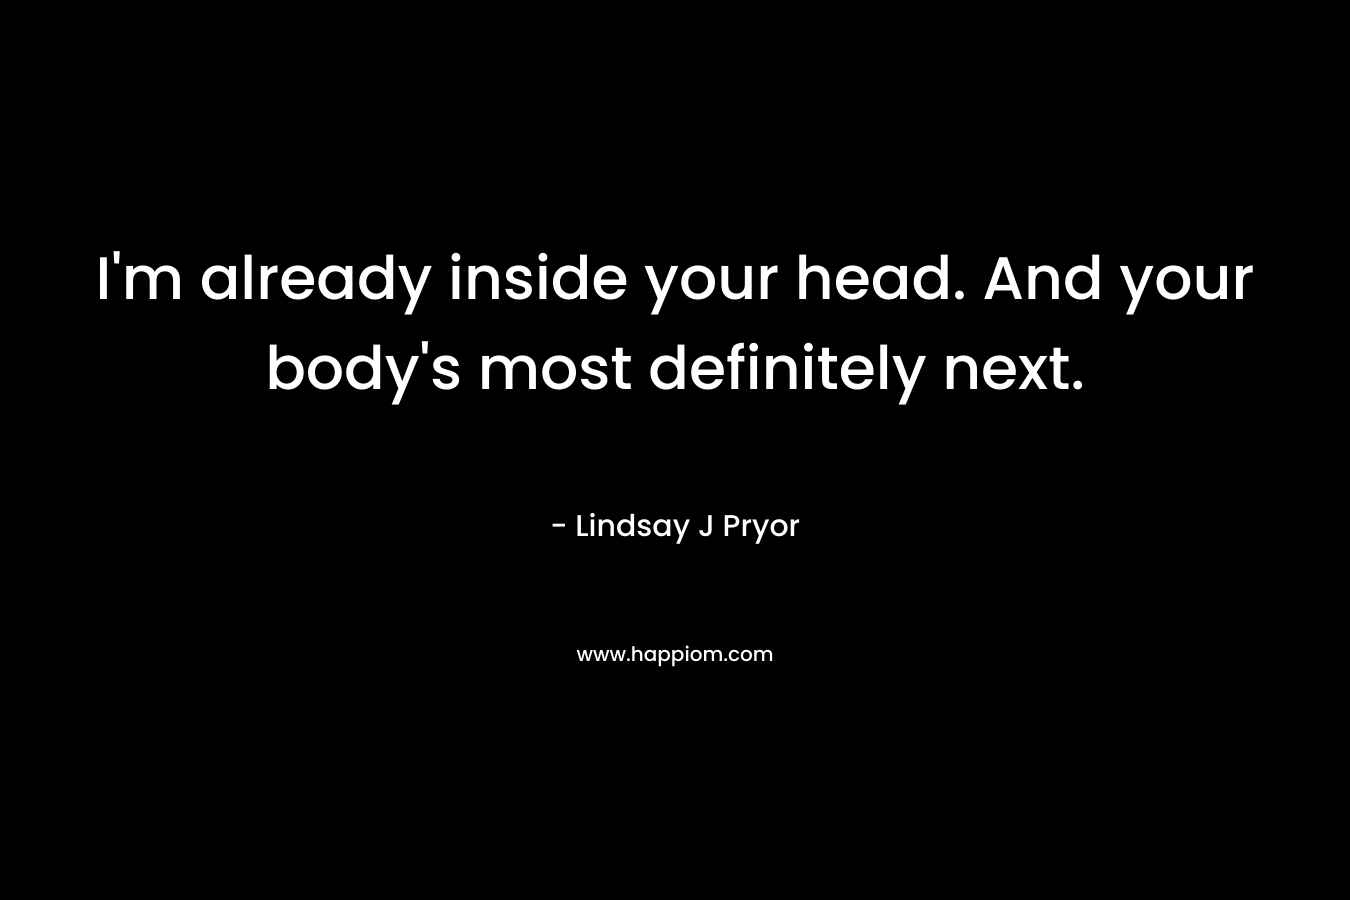 I'm already inside your head. And your body's most definitely next.